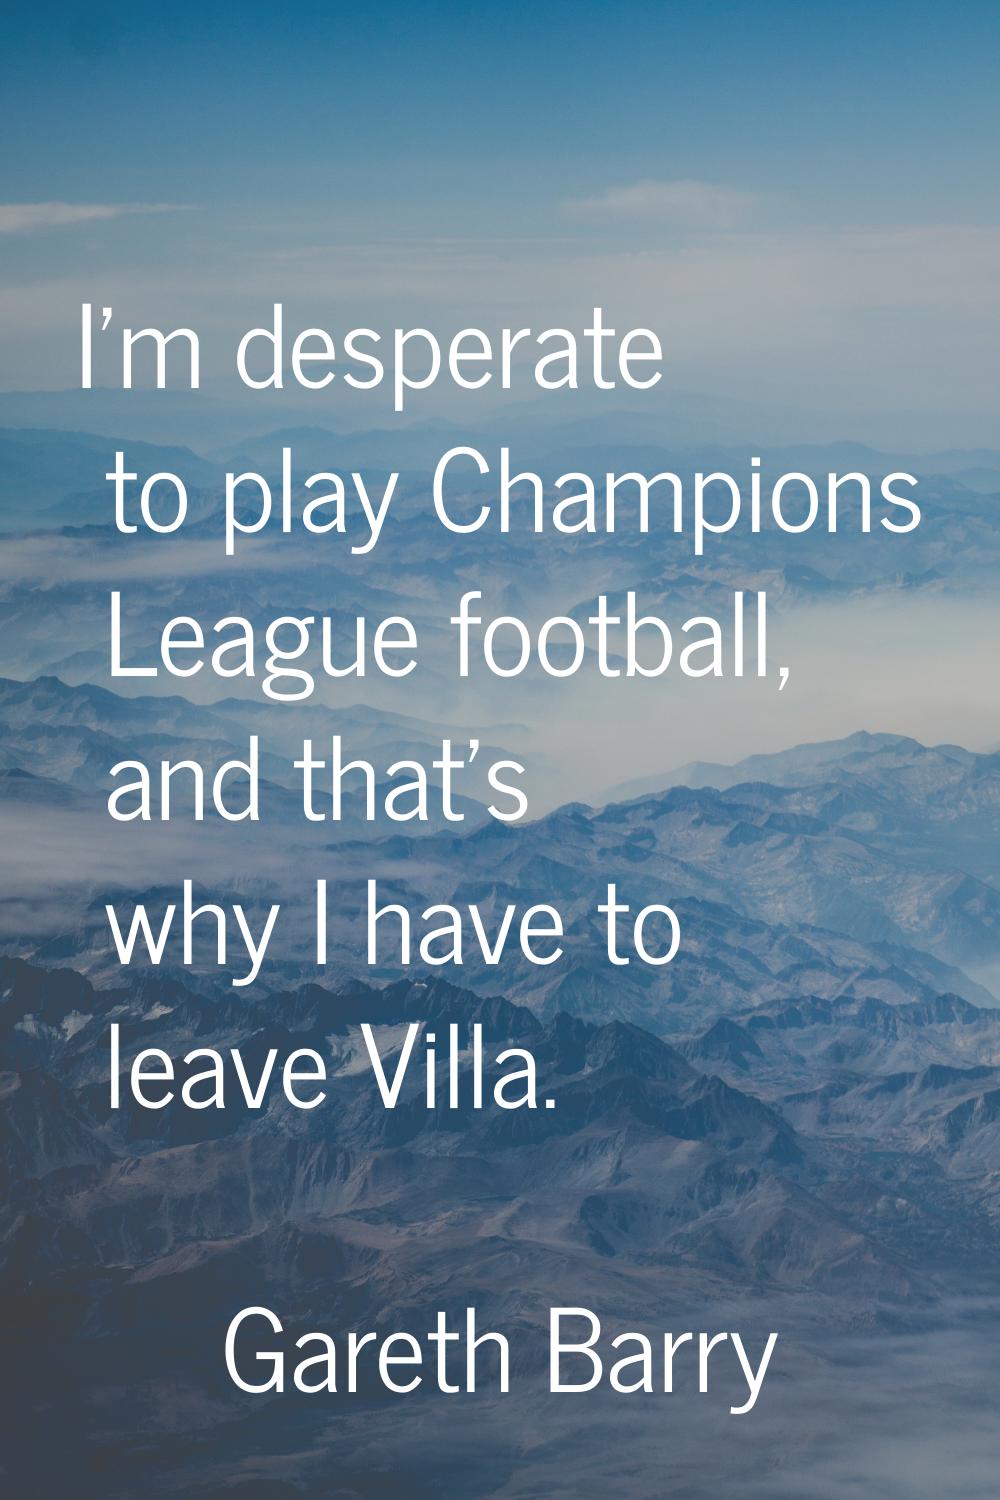 I'm desperate to play Champions League football, and that's why I have to leave Villa.